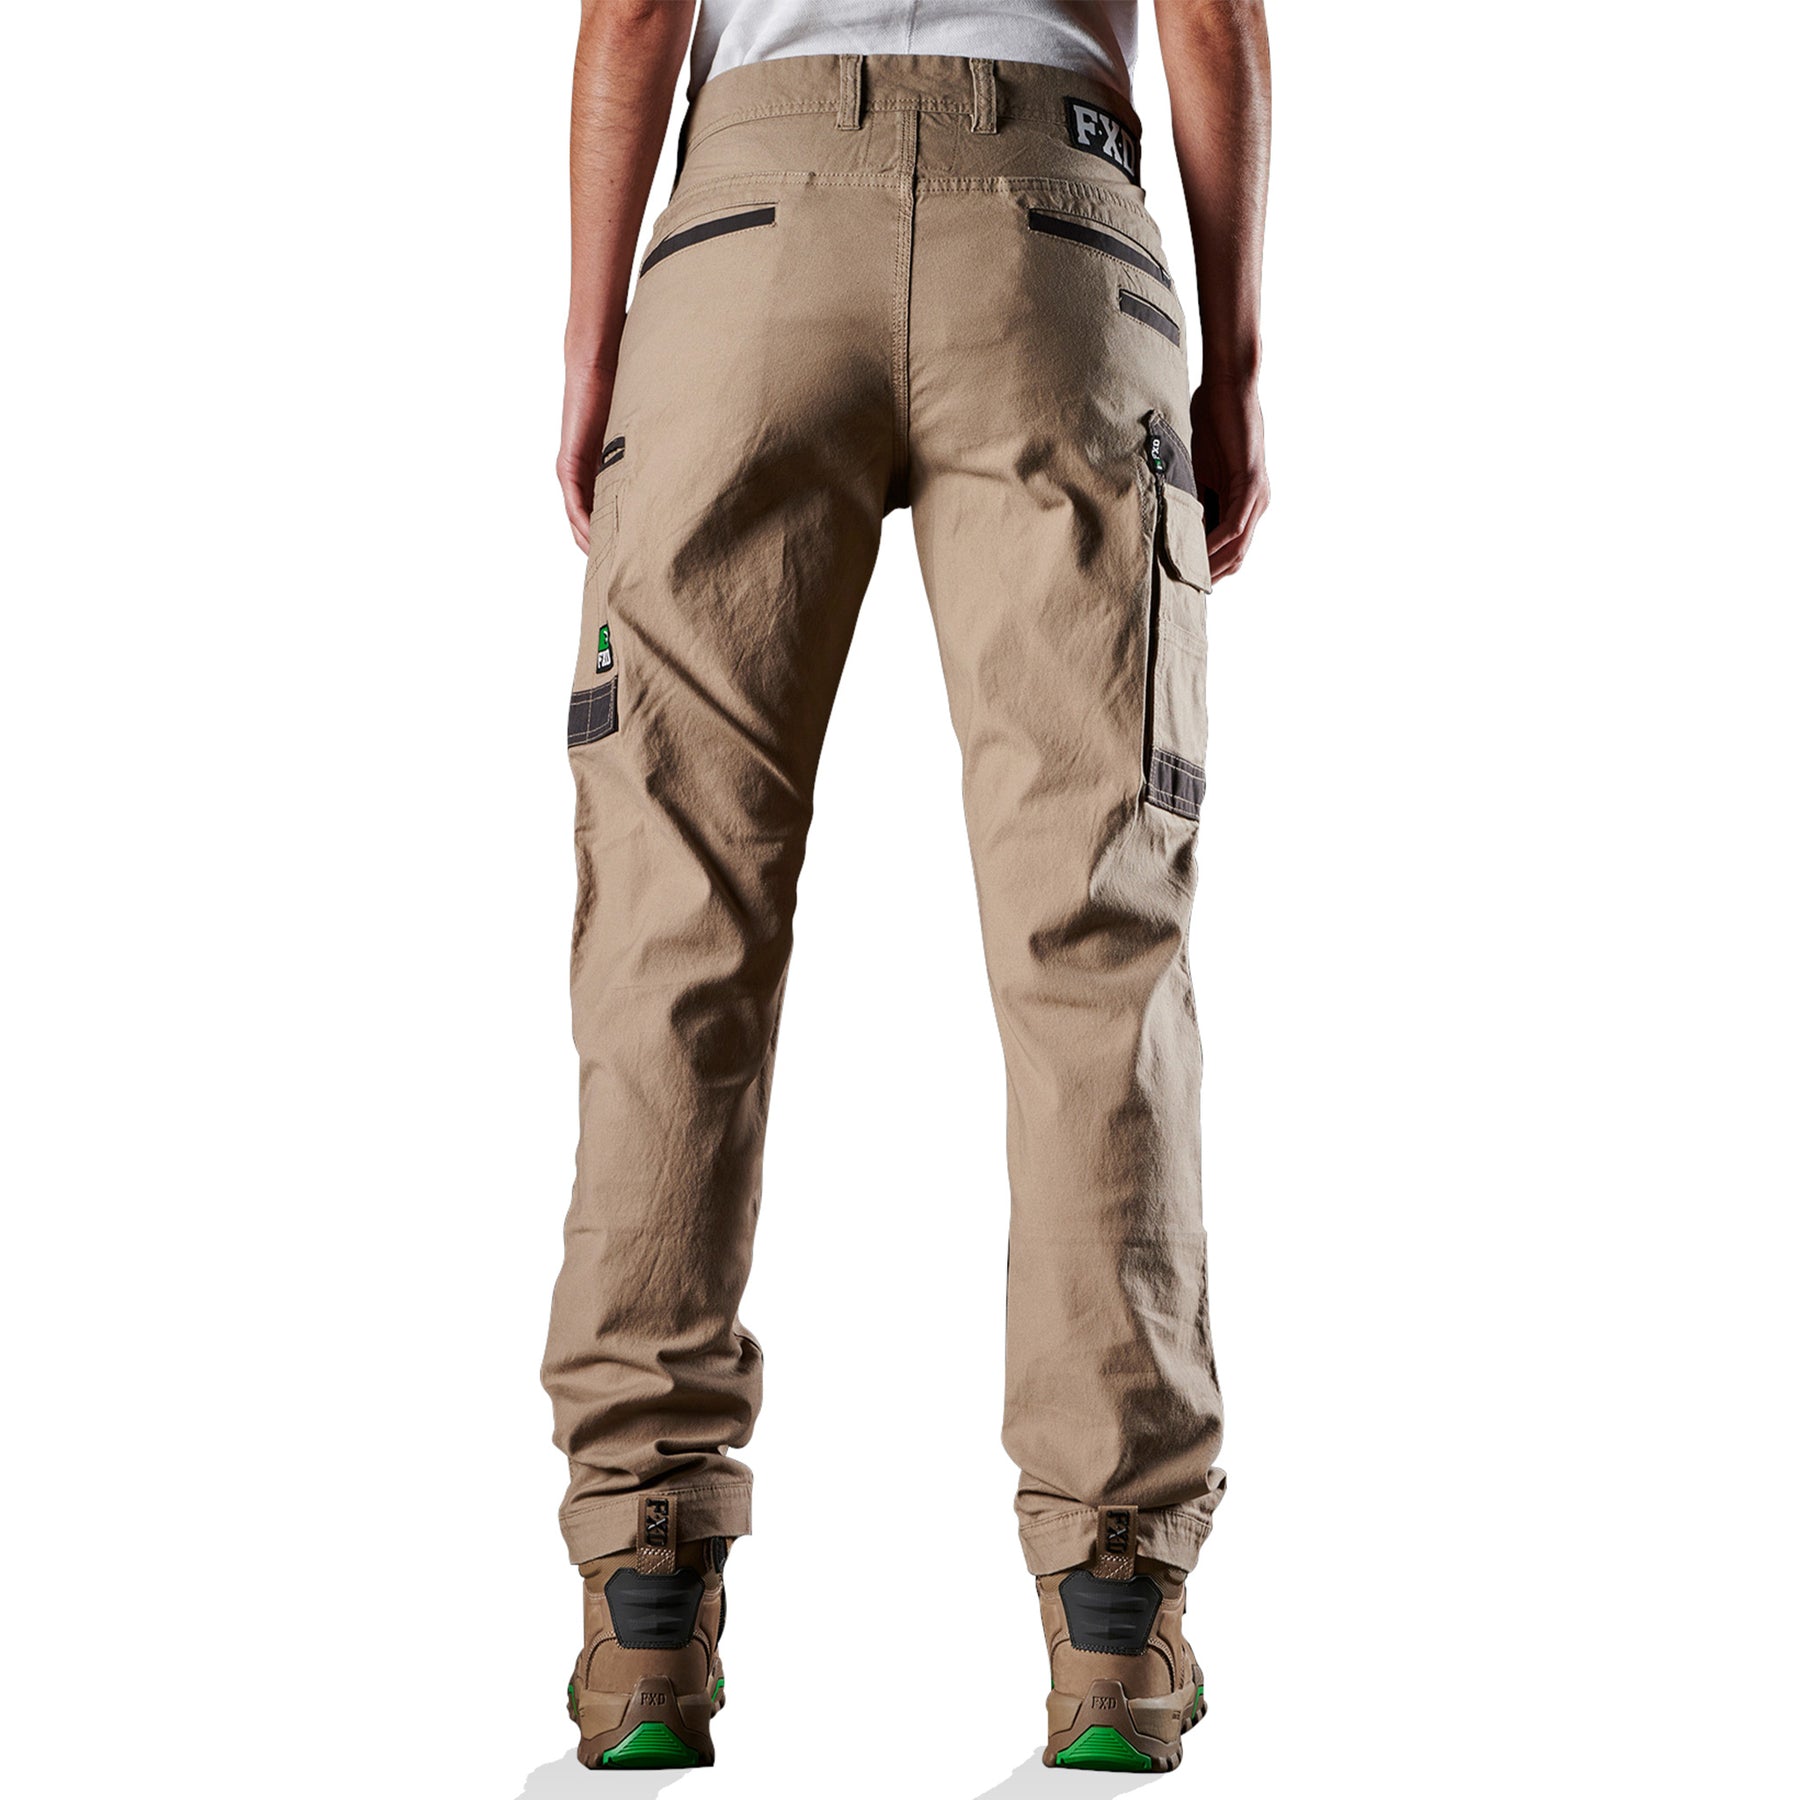 fxd womens stretch work pant in khaki